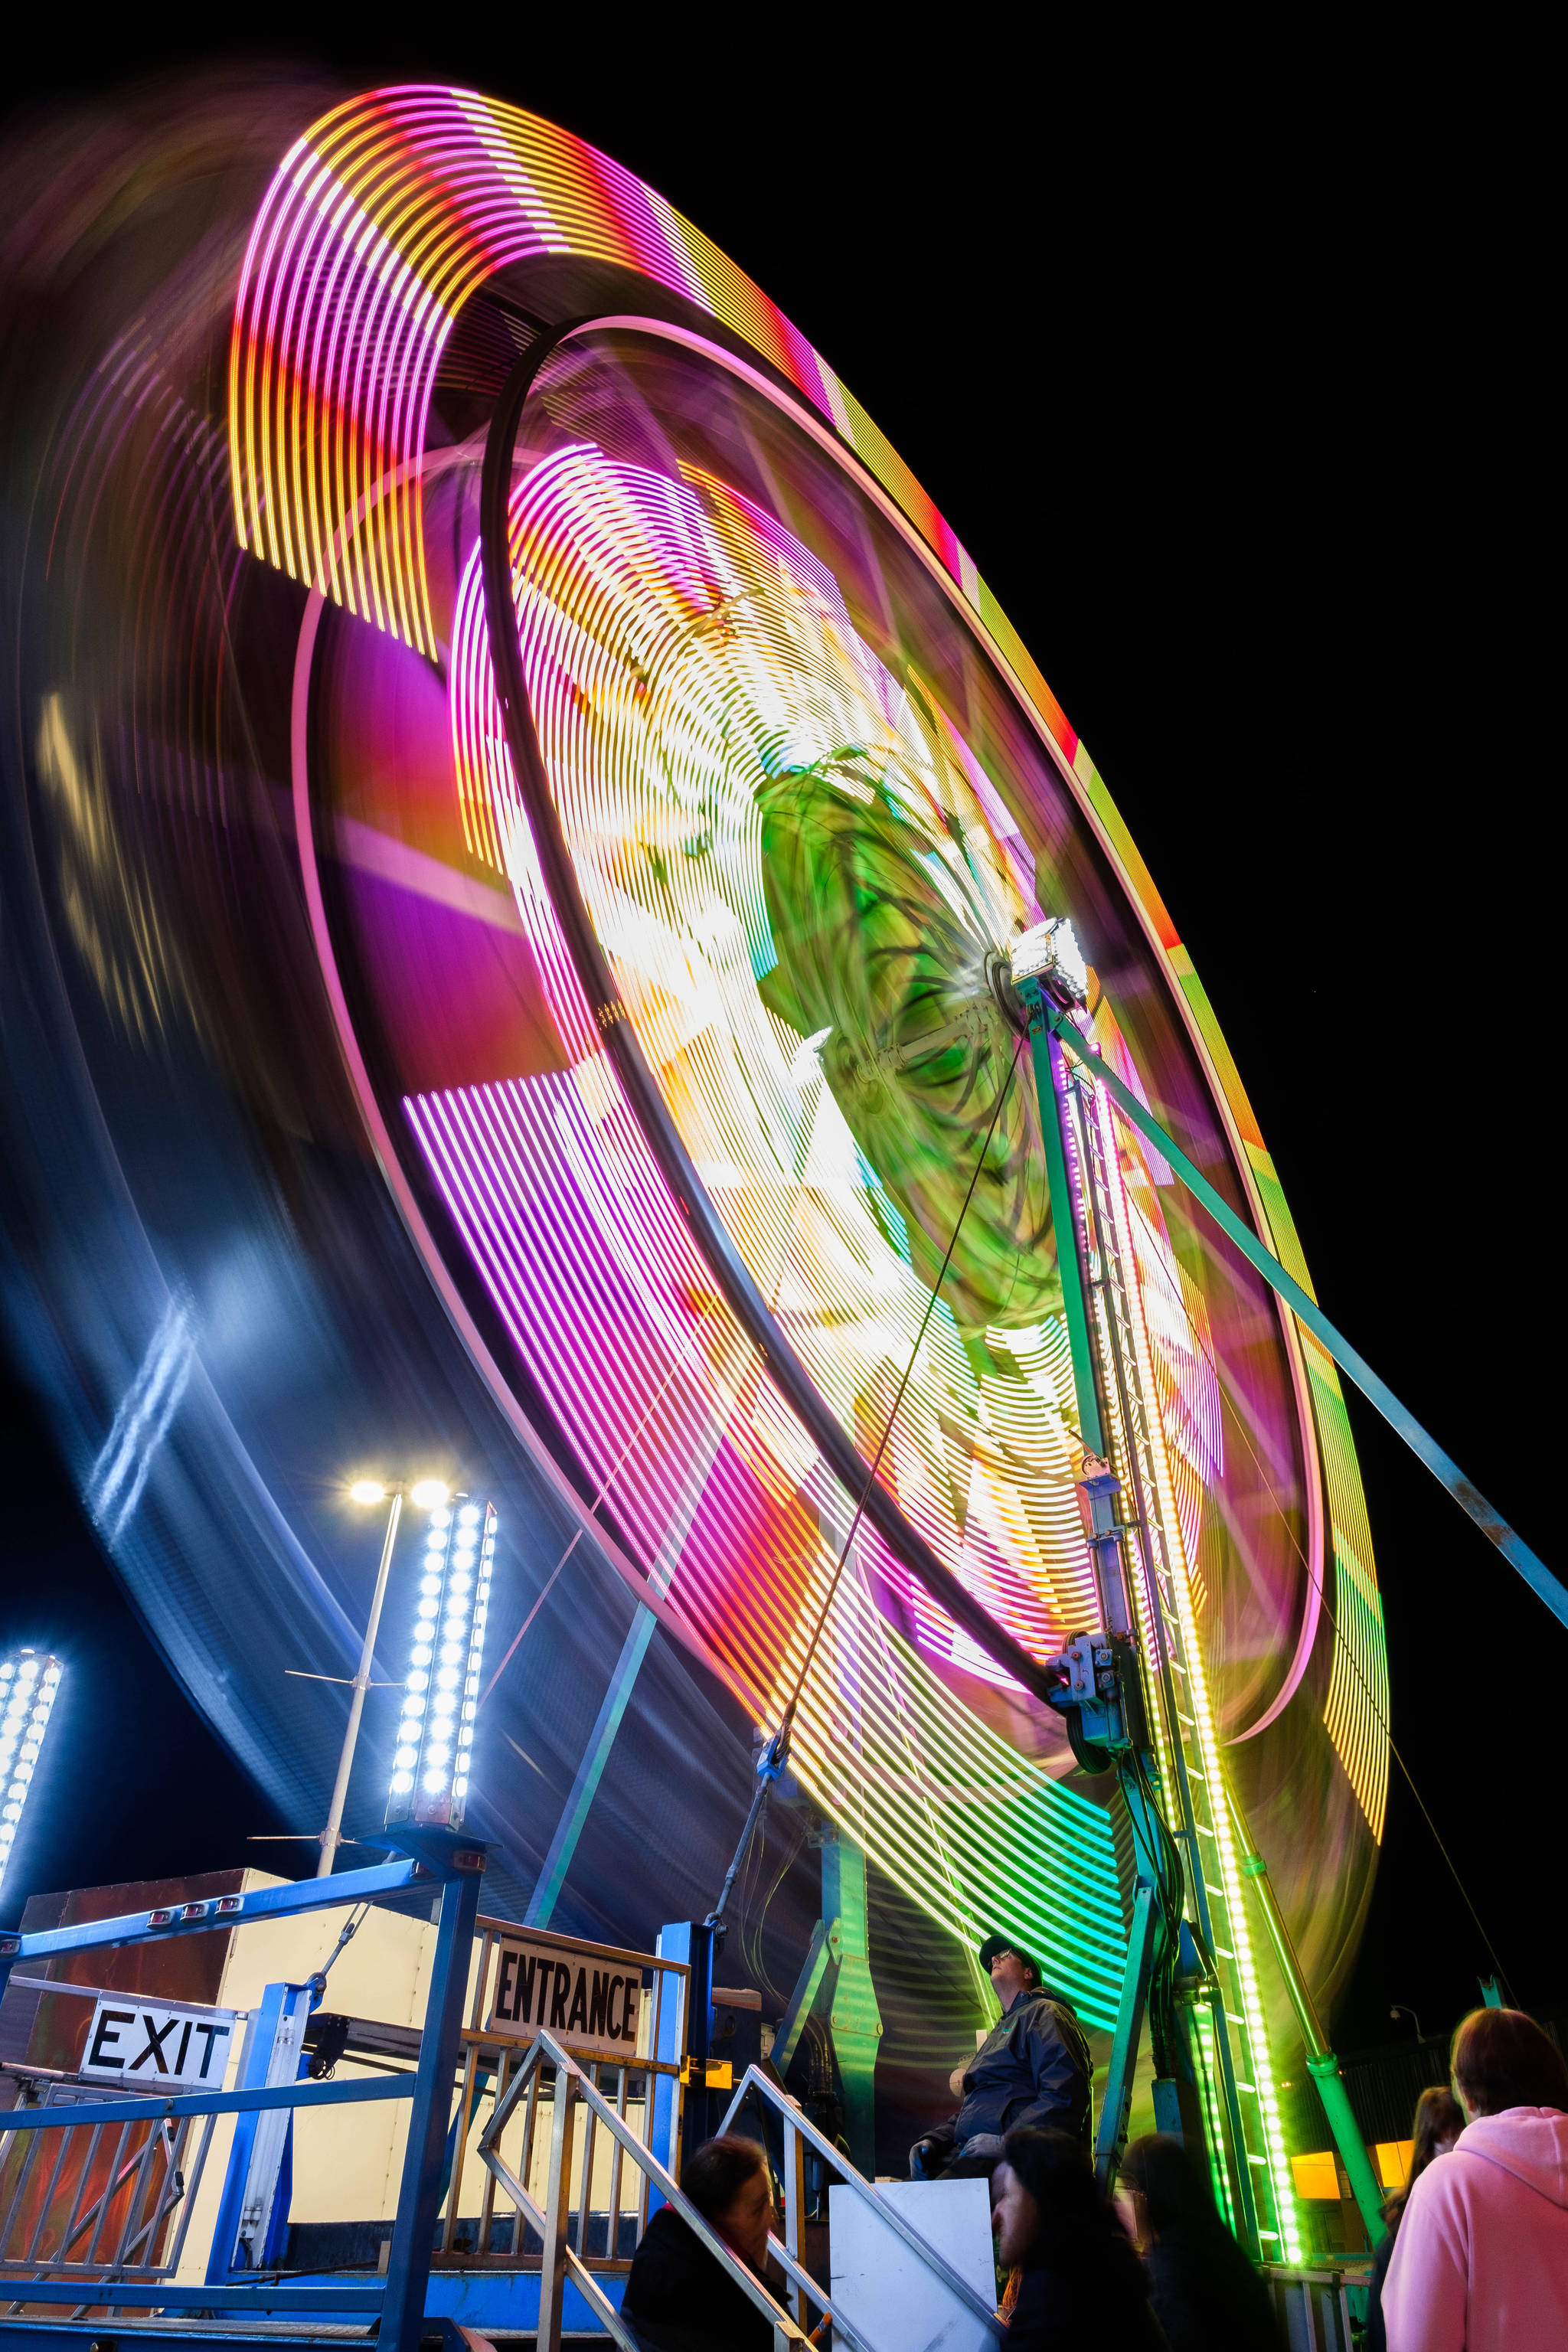 Lance Nesbitt | For the Juneau Empire In this May photo, the Ferris wheel lights up the night during a carnival in Juneau.